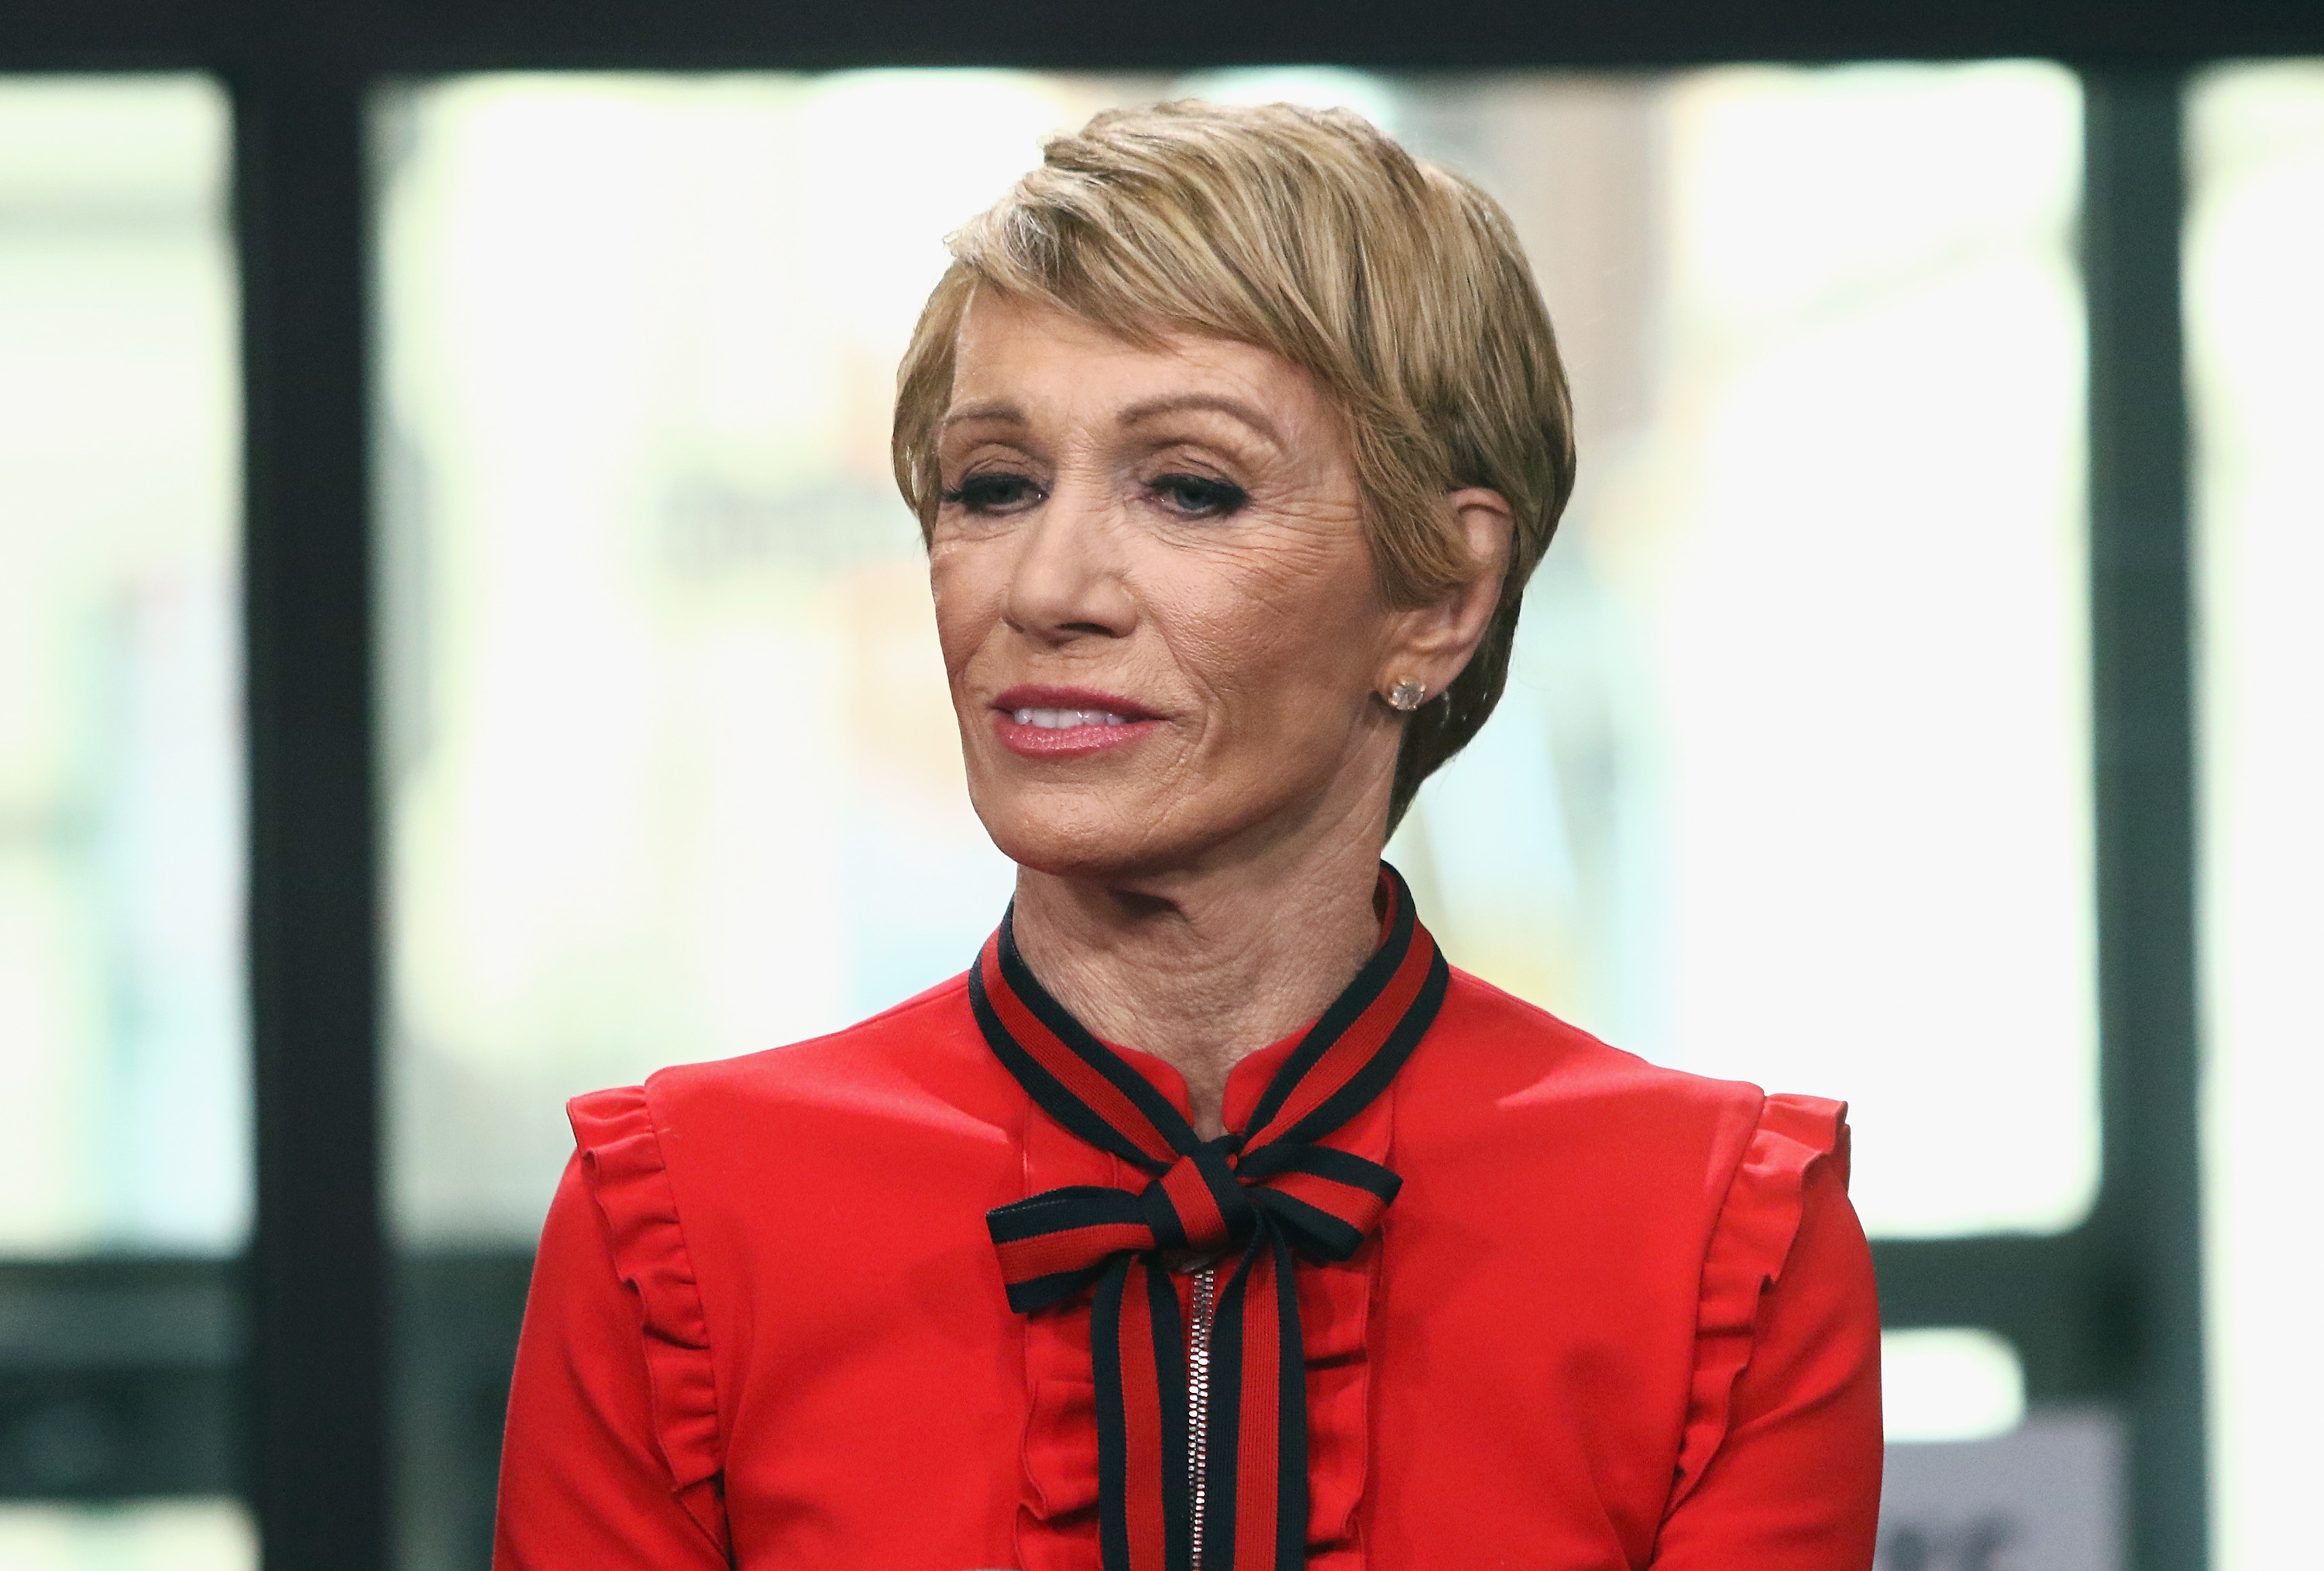 TV personality Barbara Corcoran attends the Build series to Discuss "Shark Tank" at Build Studio on February 8, 2017 in New York City | Source: Getty Images